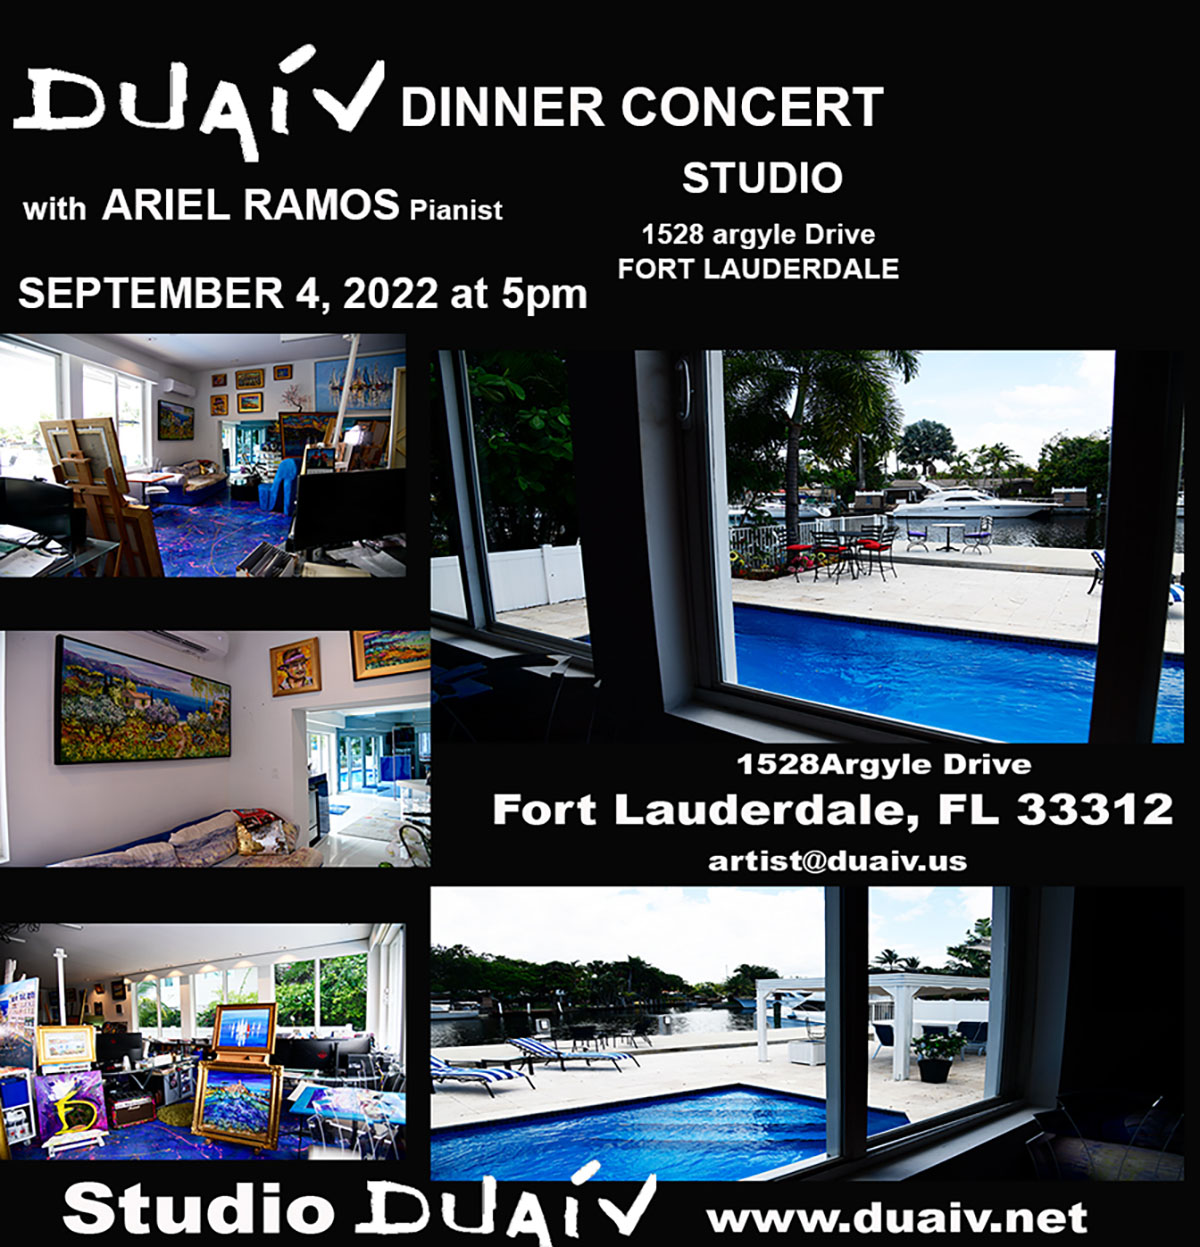 2022-09-04, DUAIV Dinner Concert with Ariel Ramos Pianist